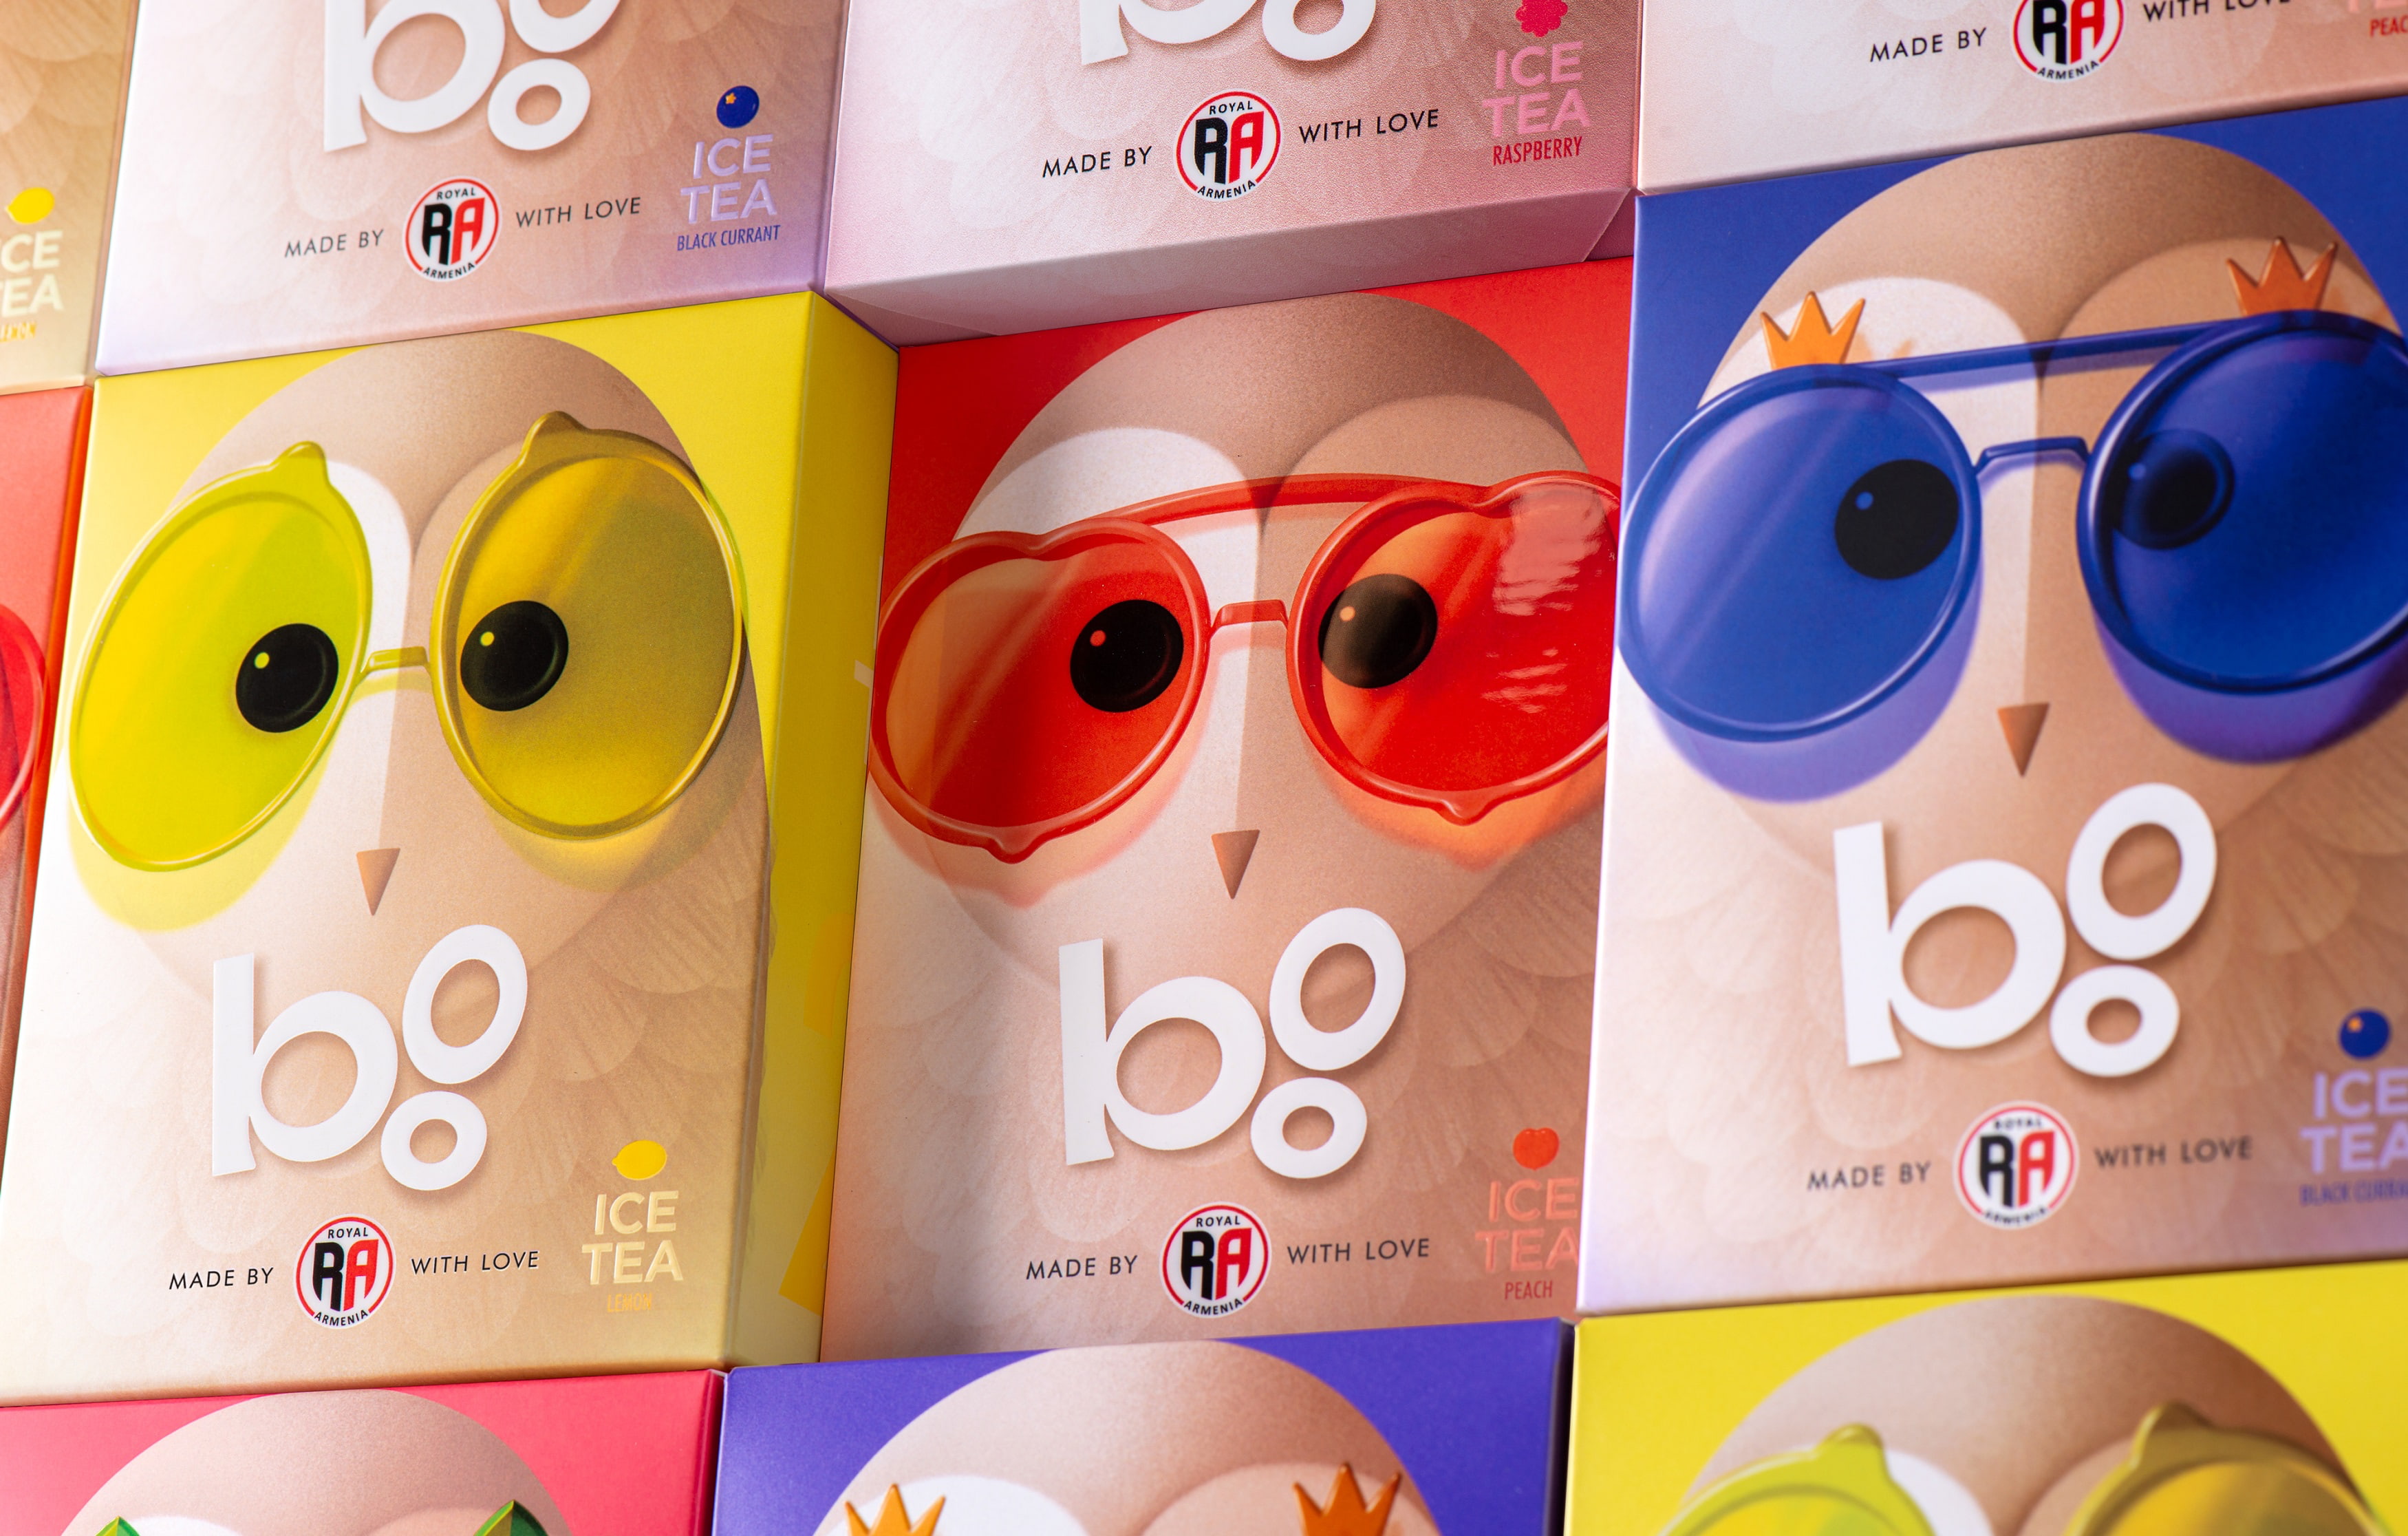 ‘Boo’ Owl Takes Center Stage in Royal Armenia’s Redesigned Packaging